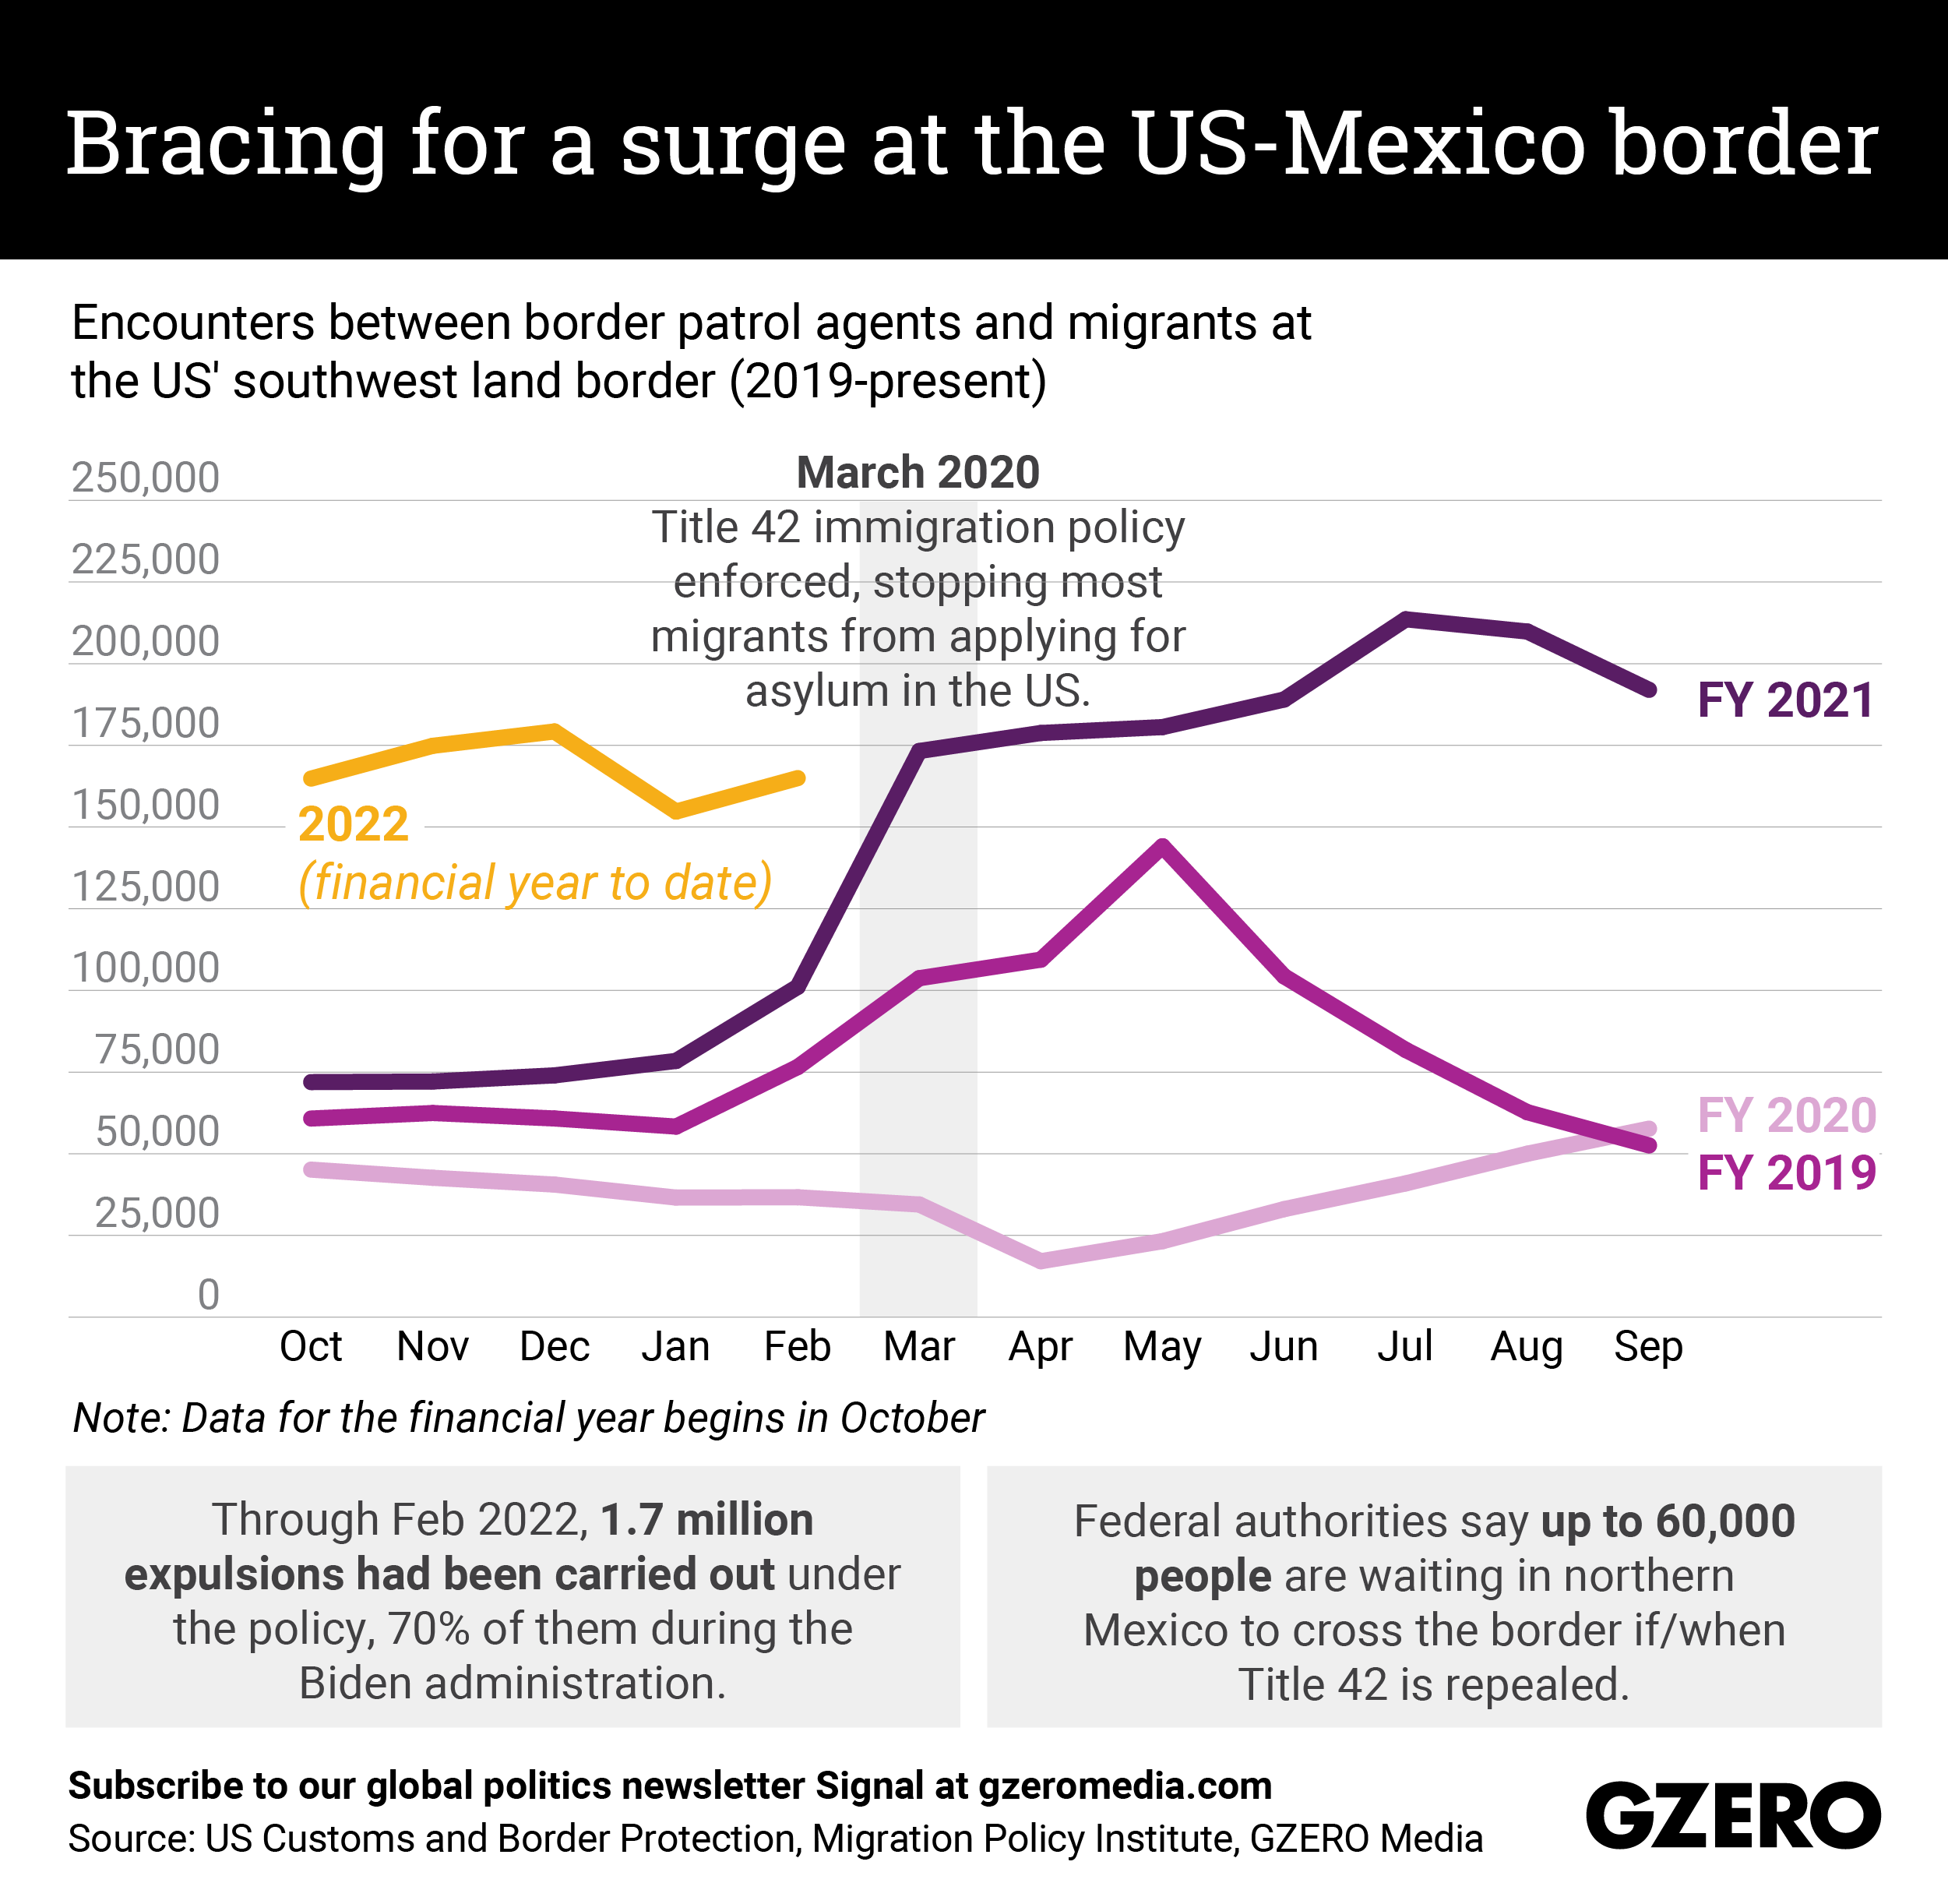 The Graphic Truth: Bracing for a surge at the US-Mexico border